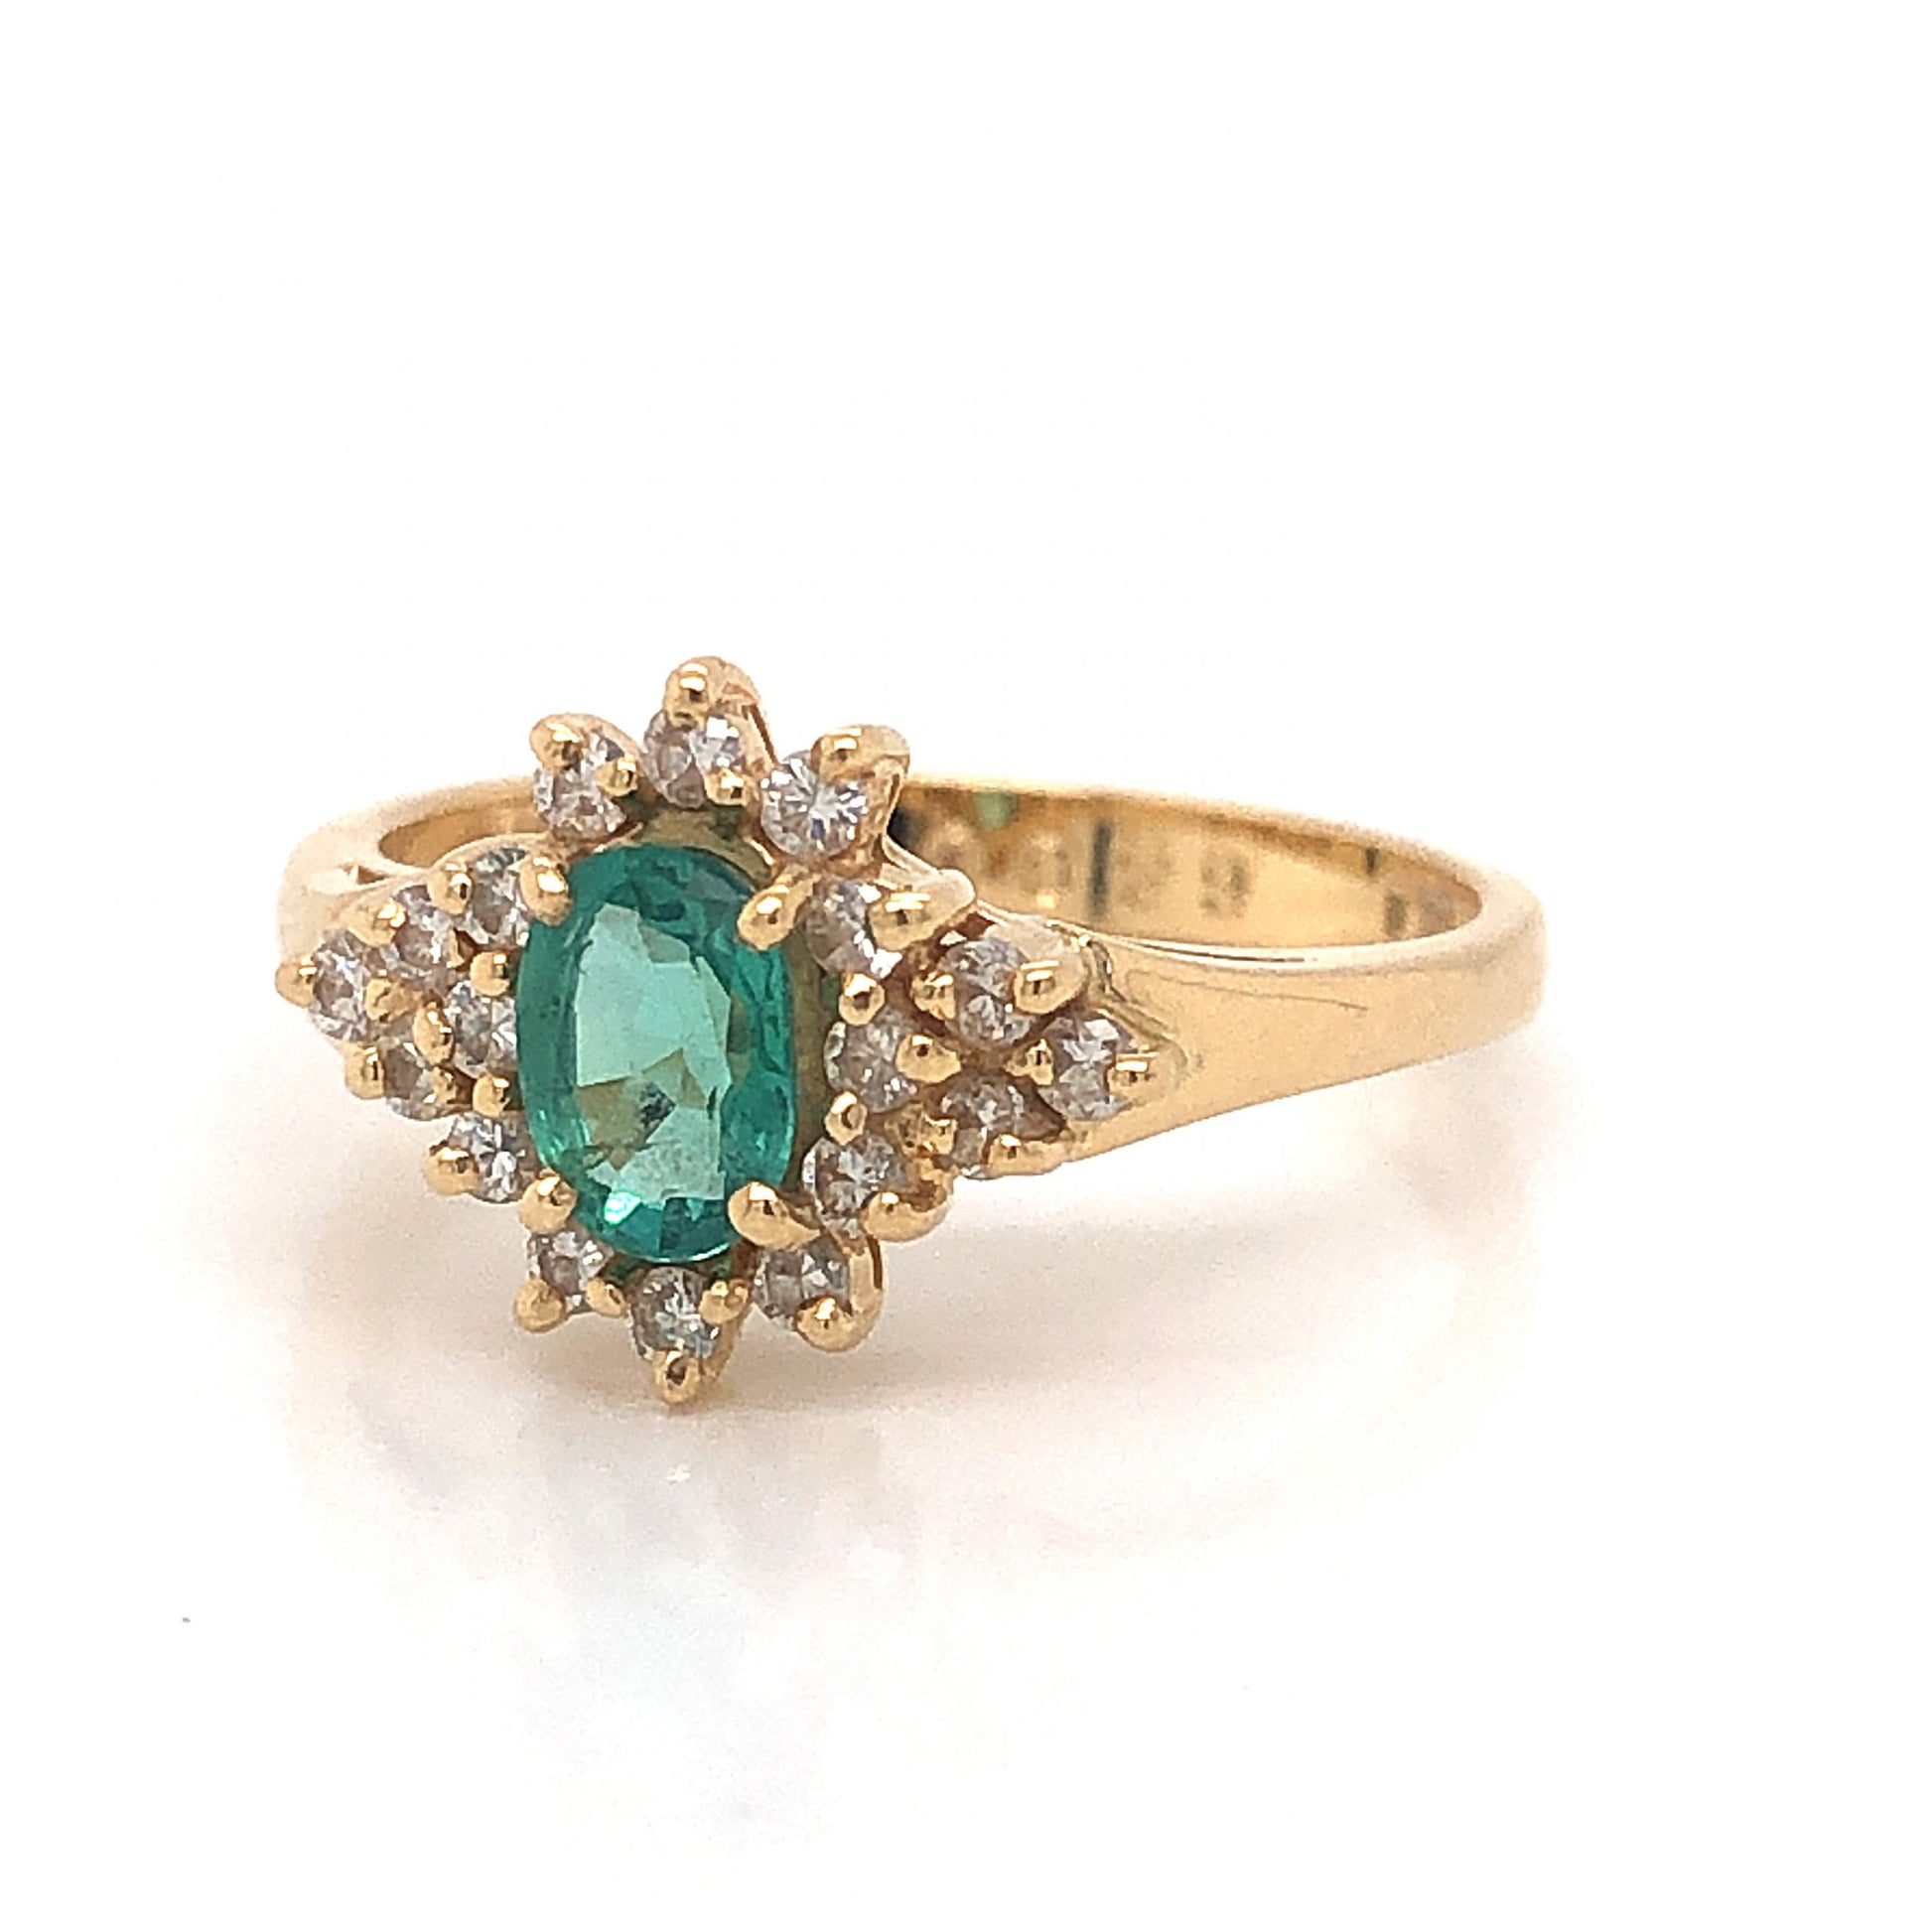 .30 Oval Cut Emerald & Diamond Ring in 14k Yellow GoldComposition: 14 Karat Yellow Gold Ring Size: 6.25 Total Diamond Weight: .18ct Total Gram Weight: 2.7 g Inscription: JAYLEN 6300 14KP
      